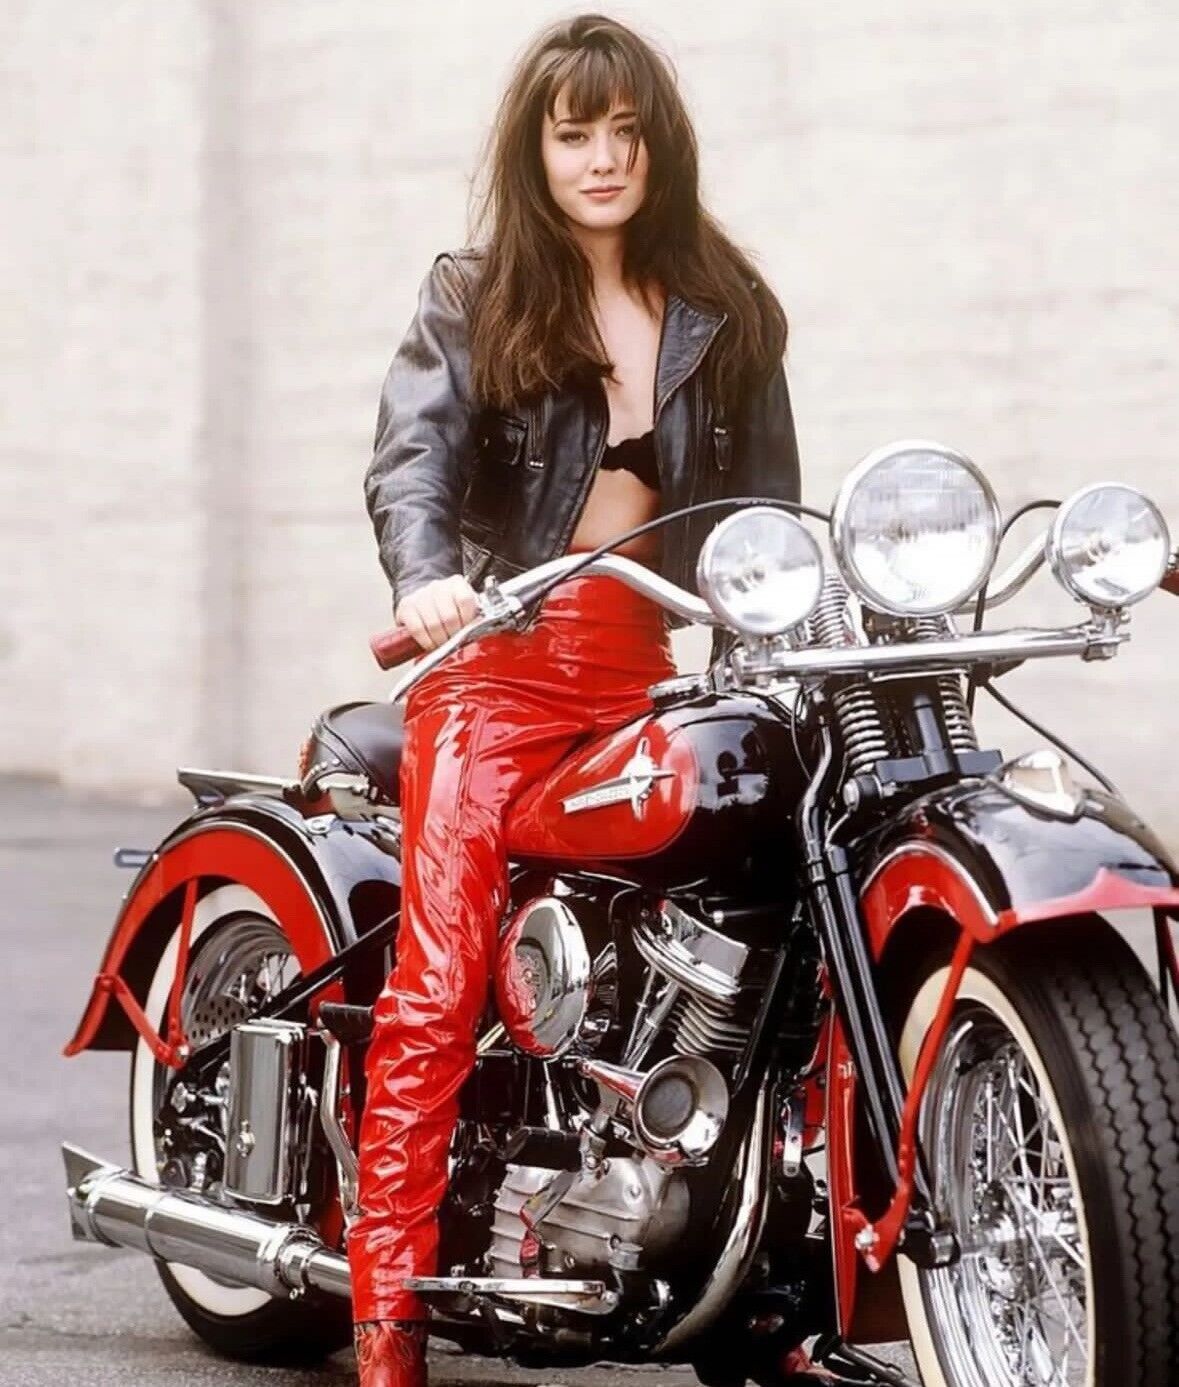 SHANNON DOHERTY - STRADDLING A MOTORCYCLE 